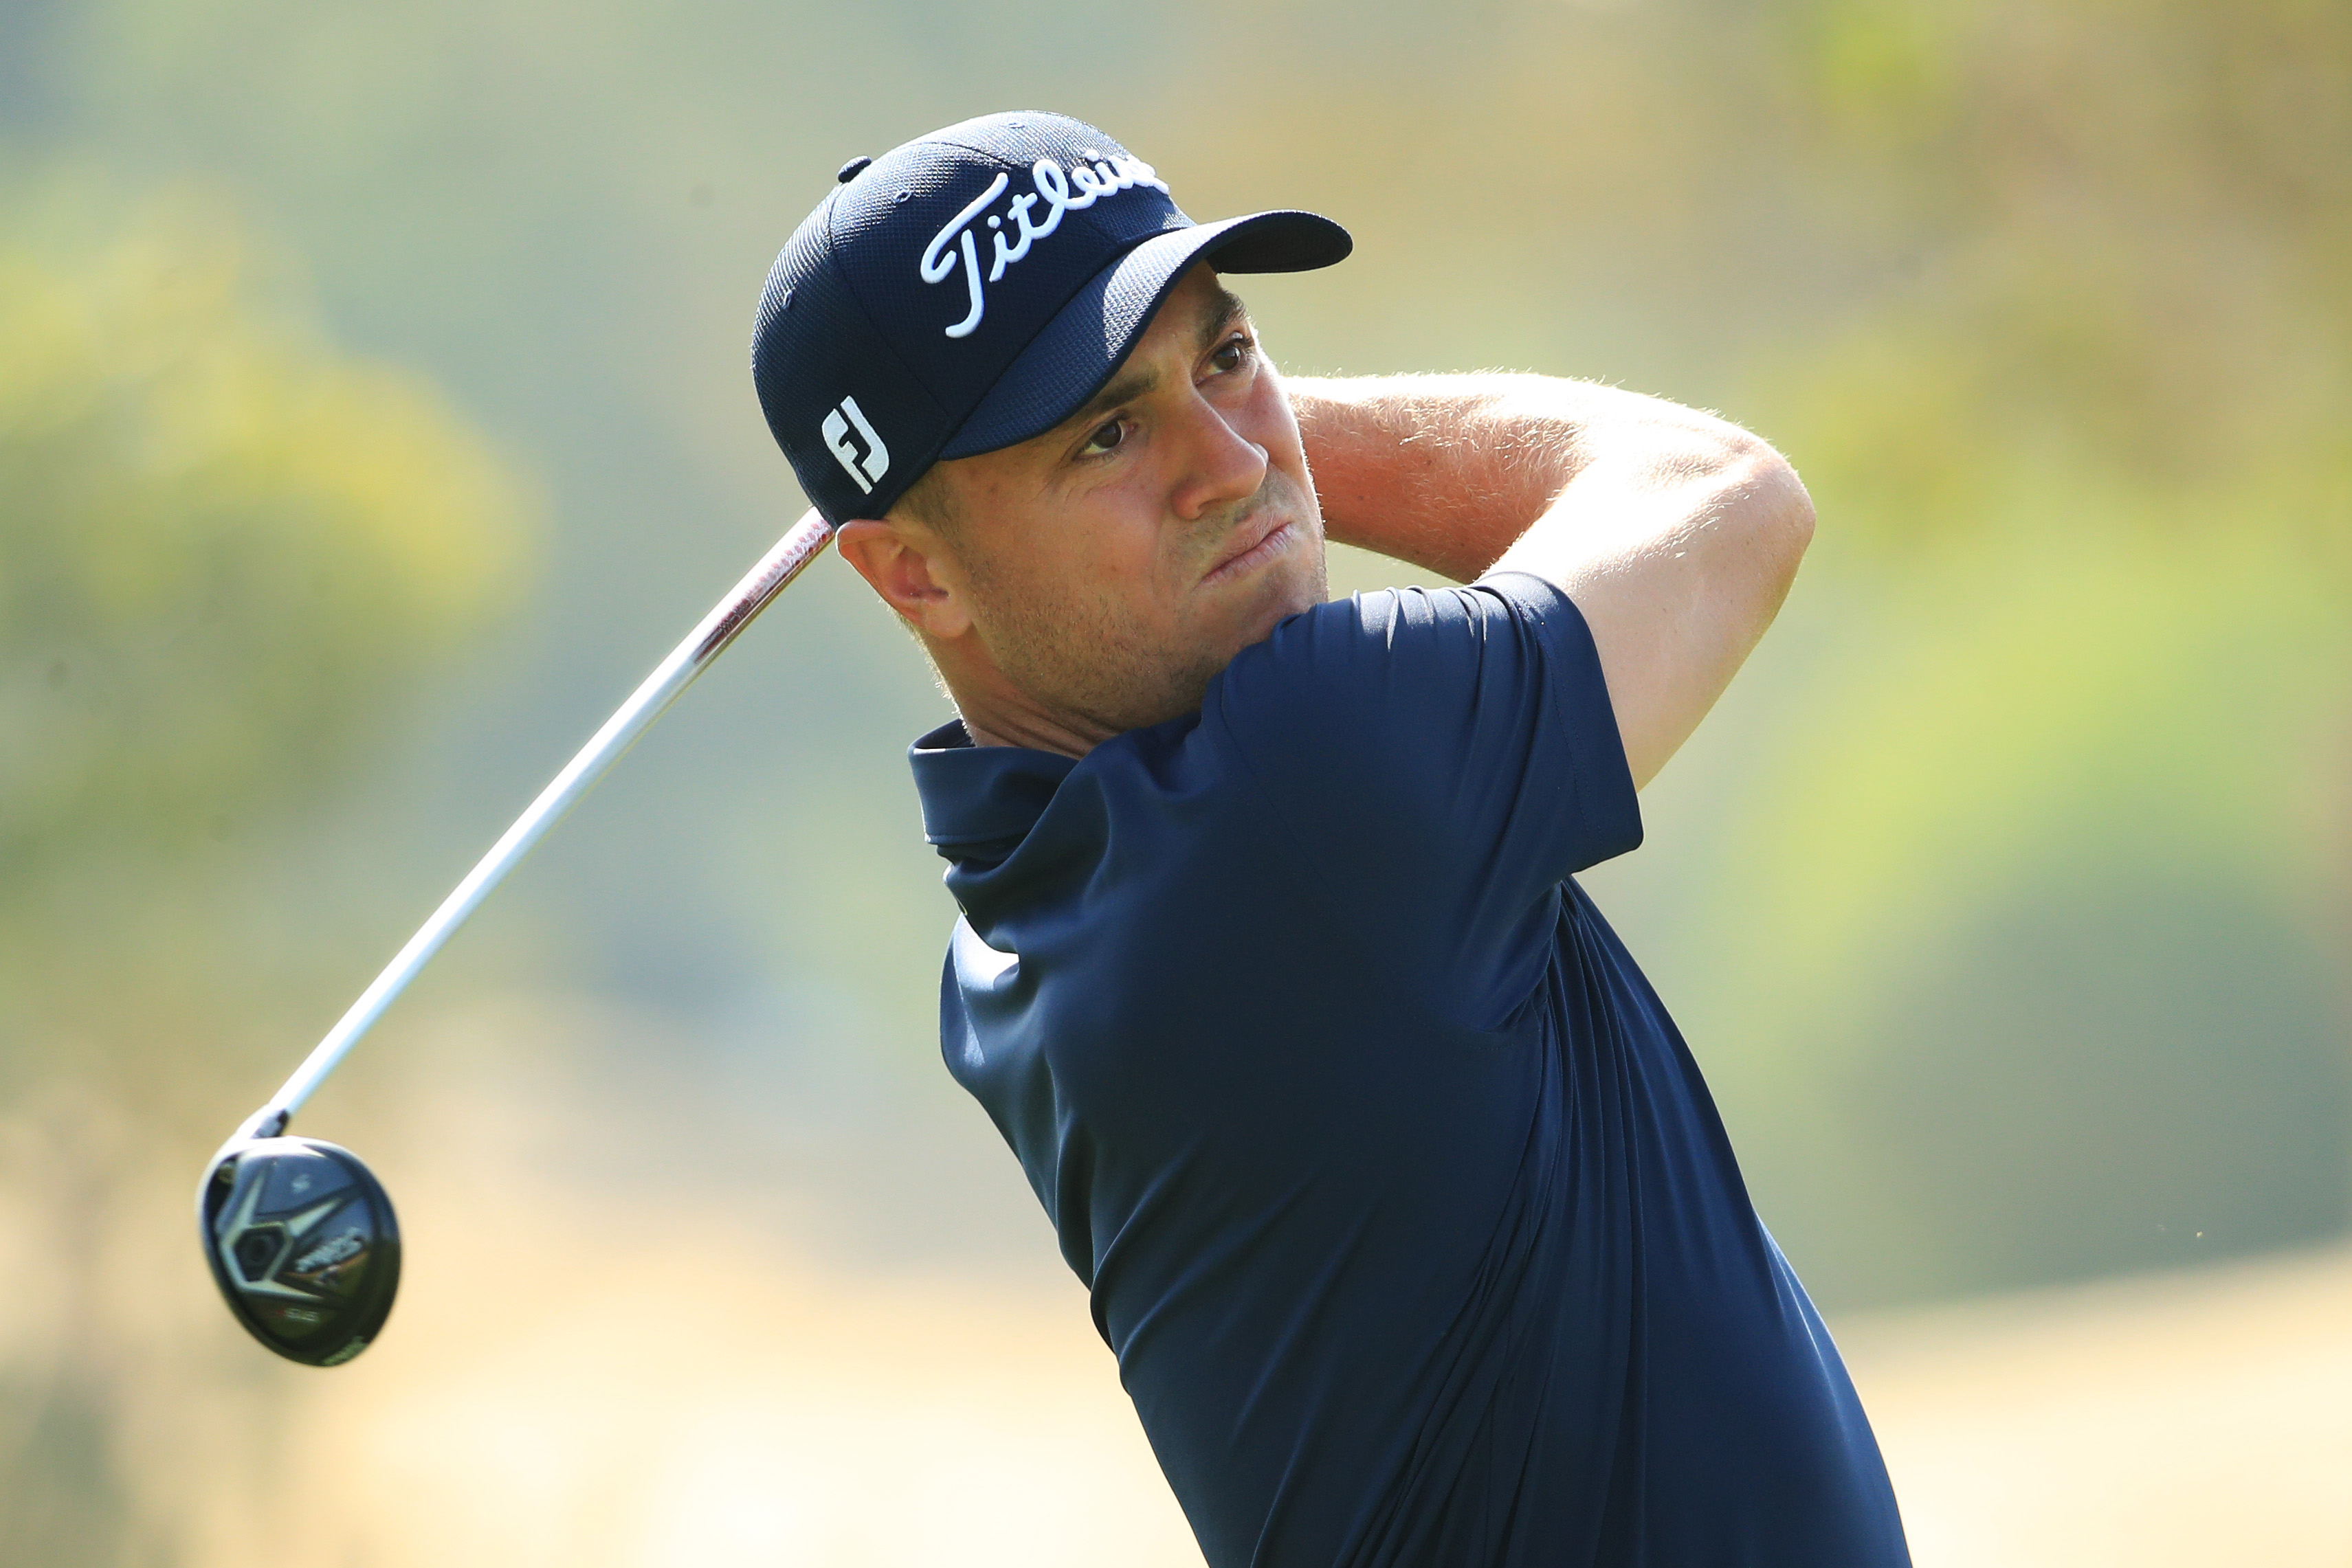 Citi Sticking With Justin Thomas ... If He Learns From Mistake